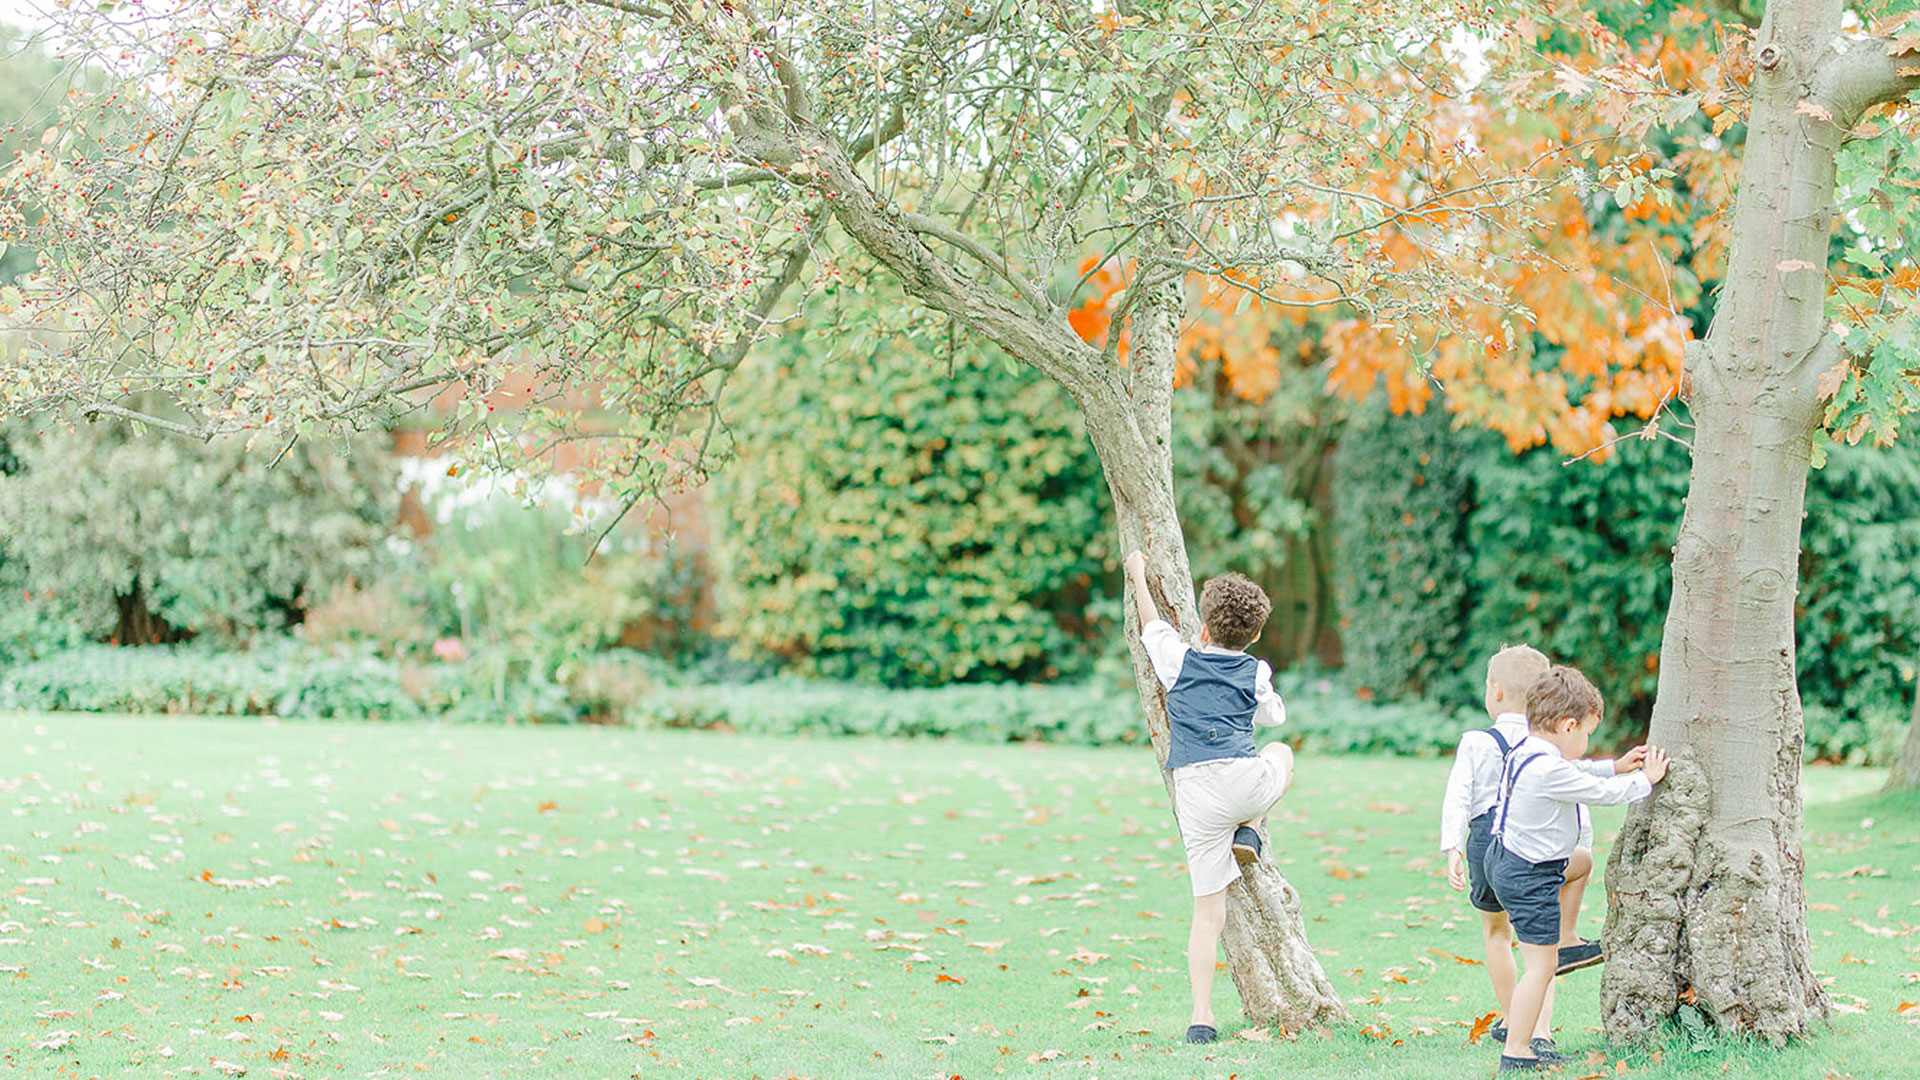 Enjoy the gardens at Gaynes Park with space to play garden games and keep little ones entertained - garden wedding